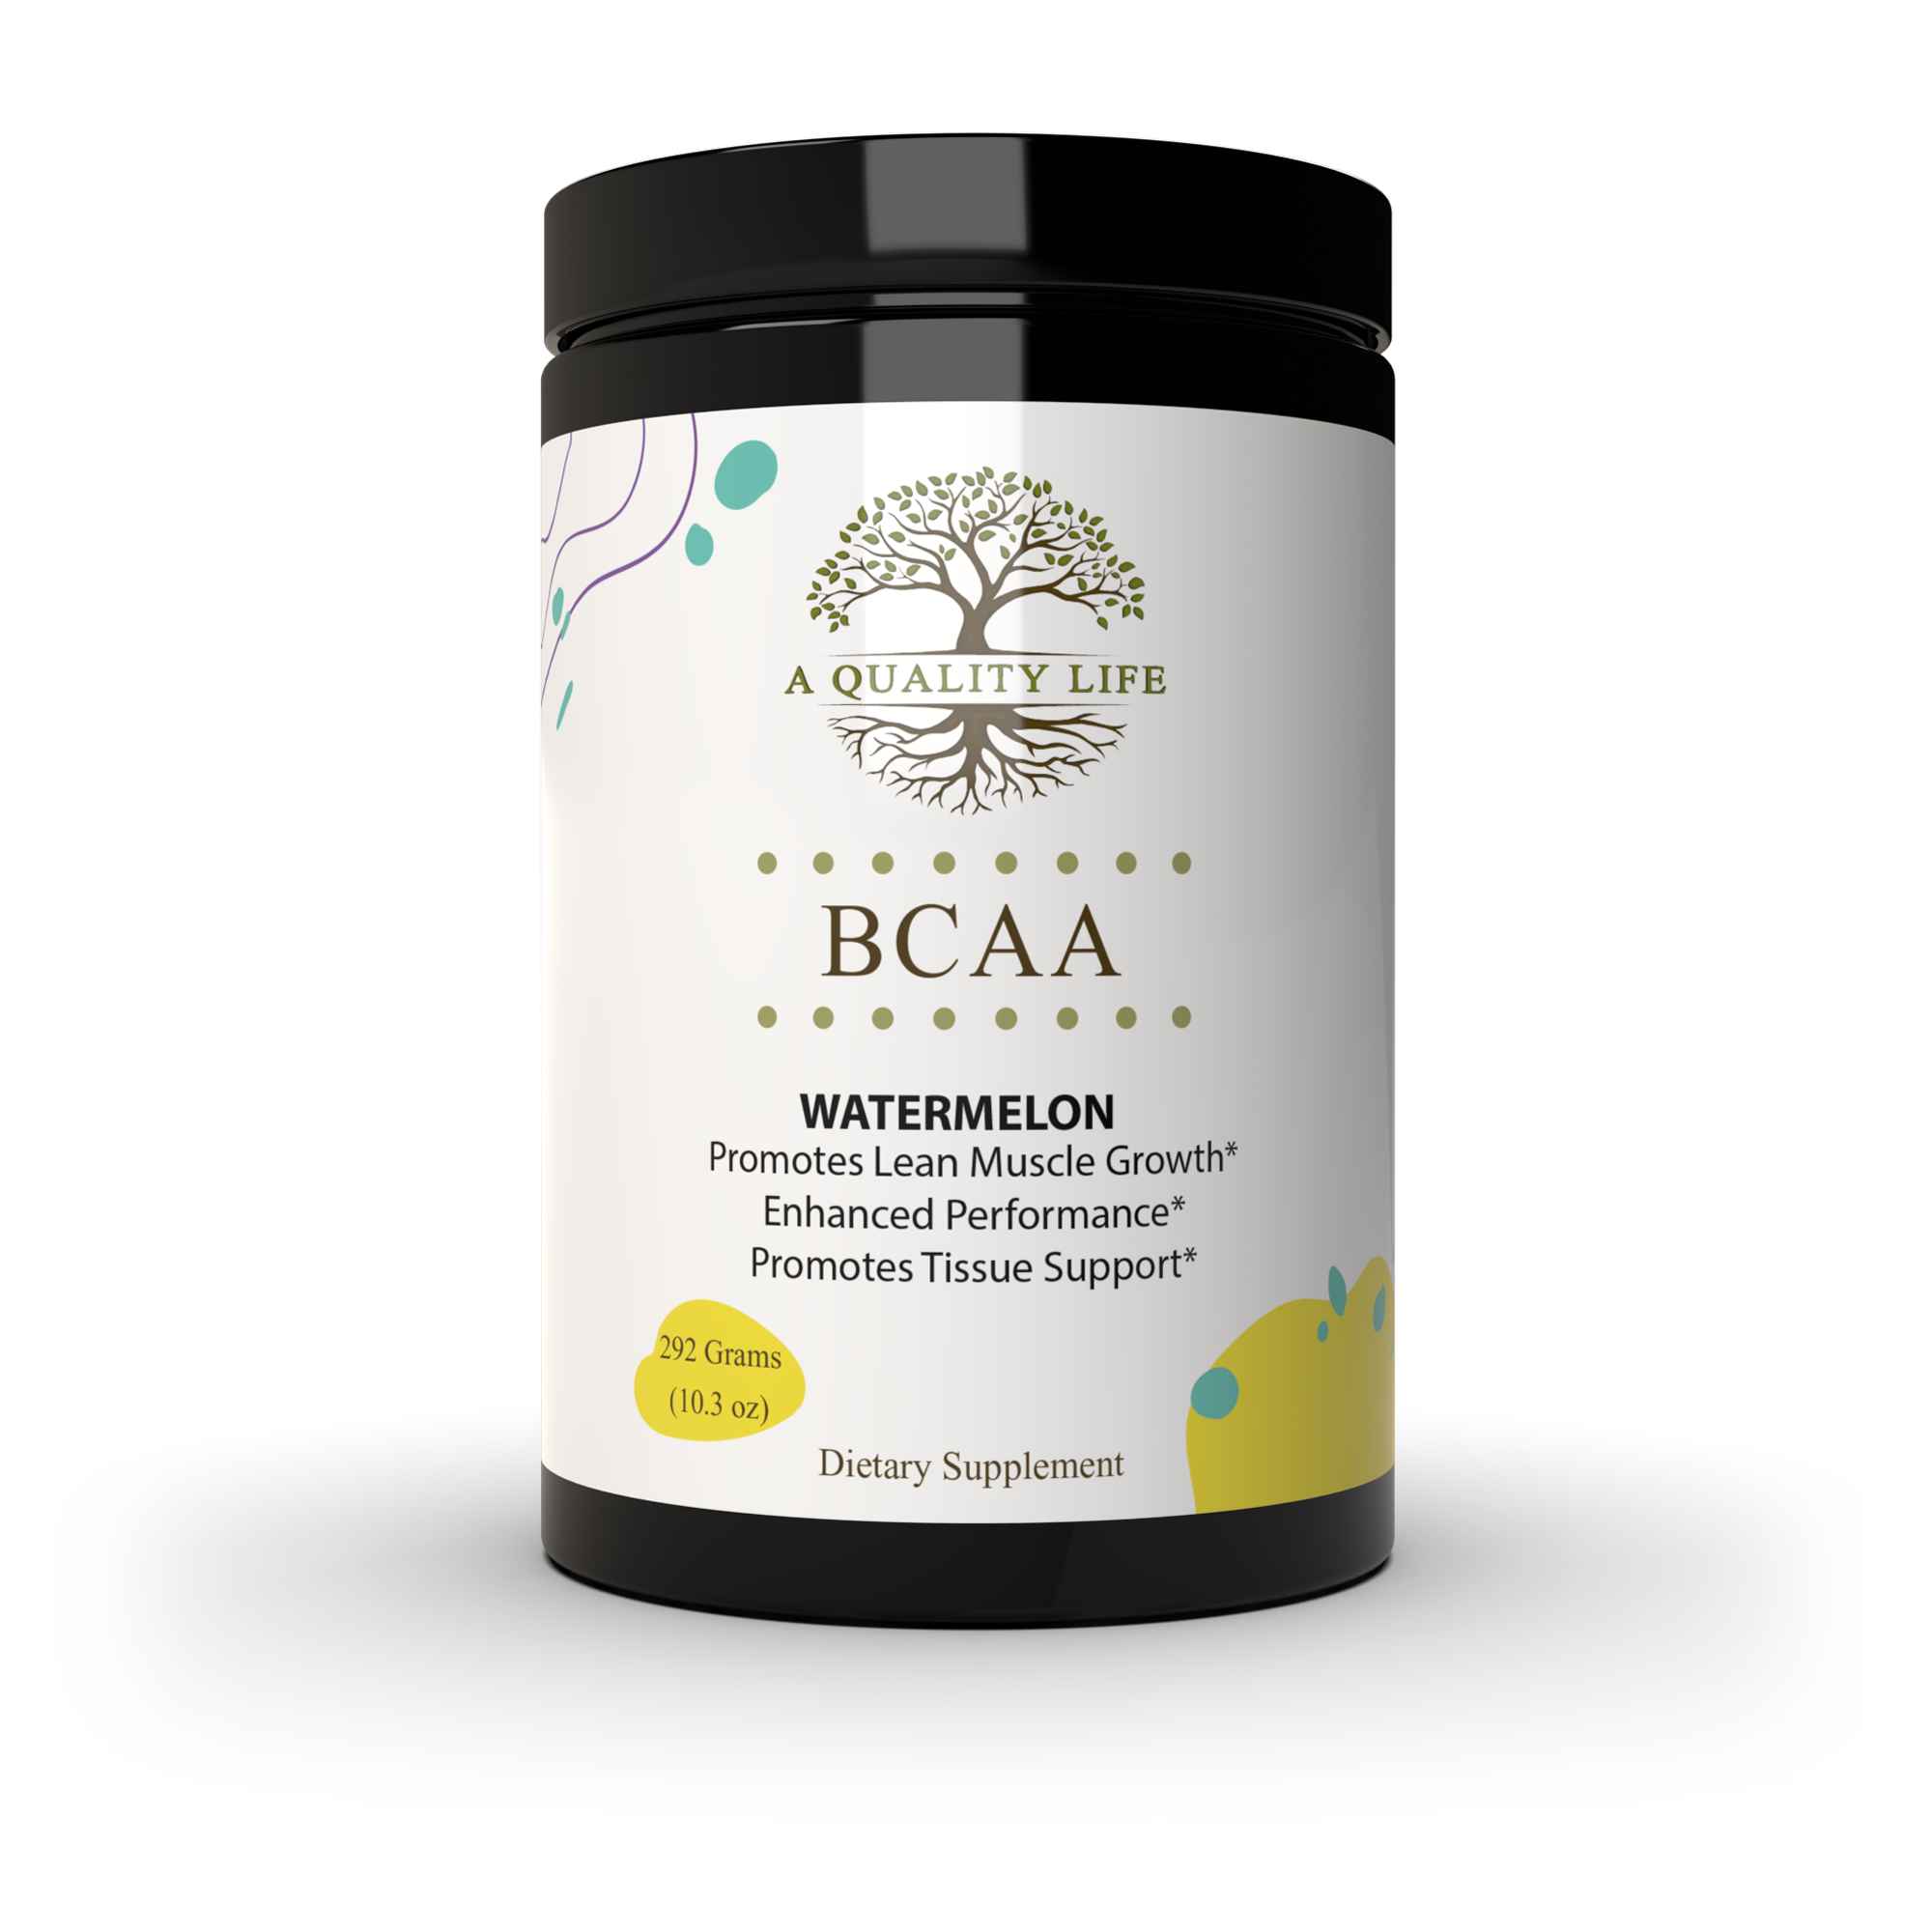 BCAA Watermelon - Optimal Muscle Recovery & Growth